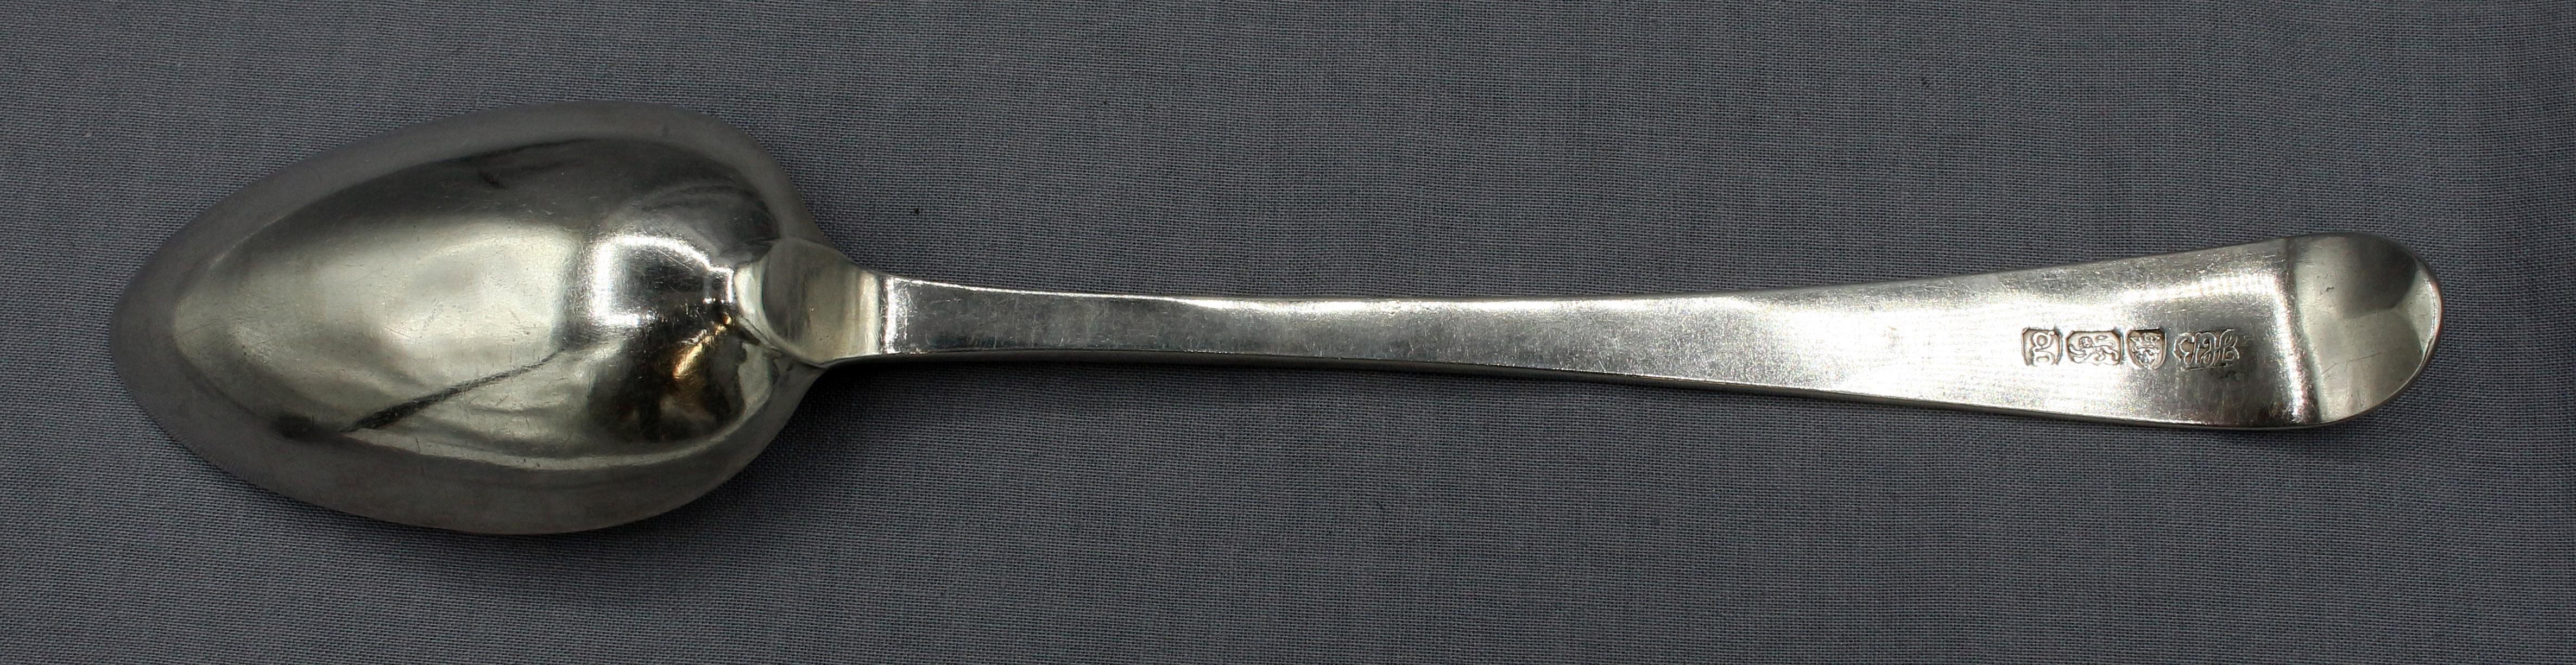 Sterling silver tablespoon by Hester Bateman, London, 1782. George III period Old English Engraved pattern. The bright cutting is superb. The crest has been erased. 2.50 troy oz.
9.5